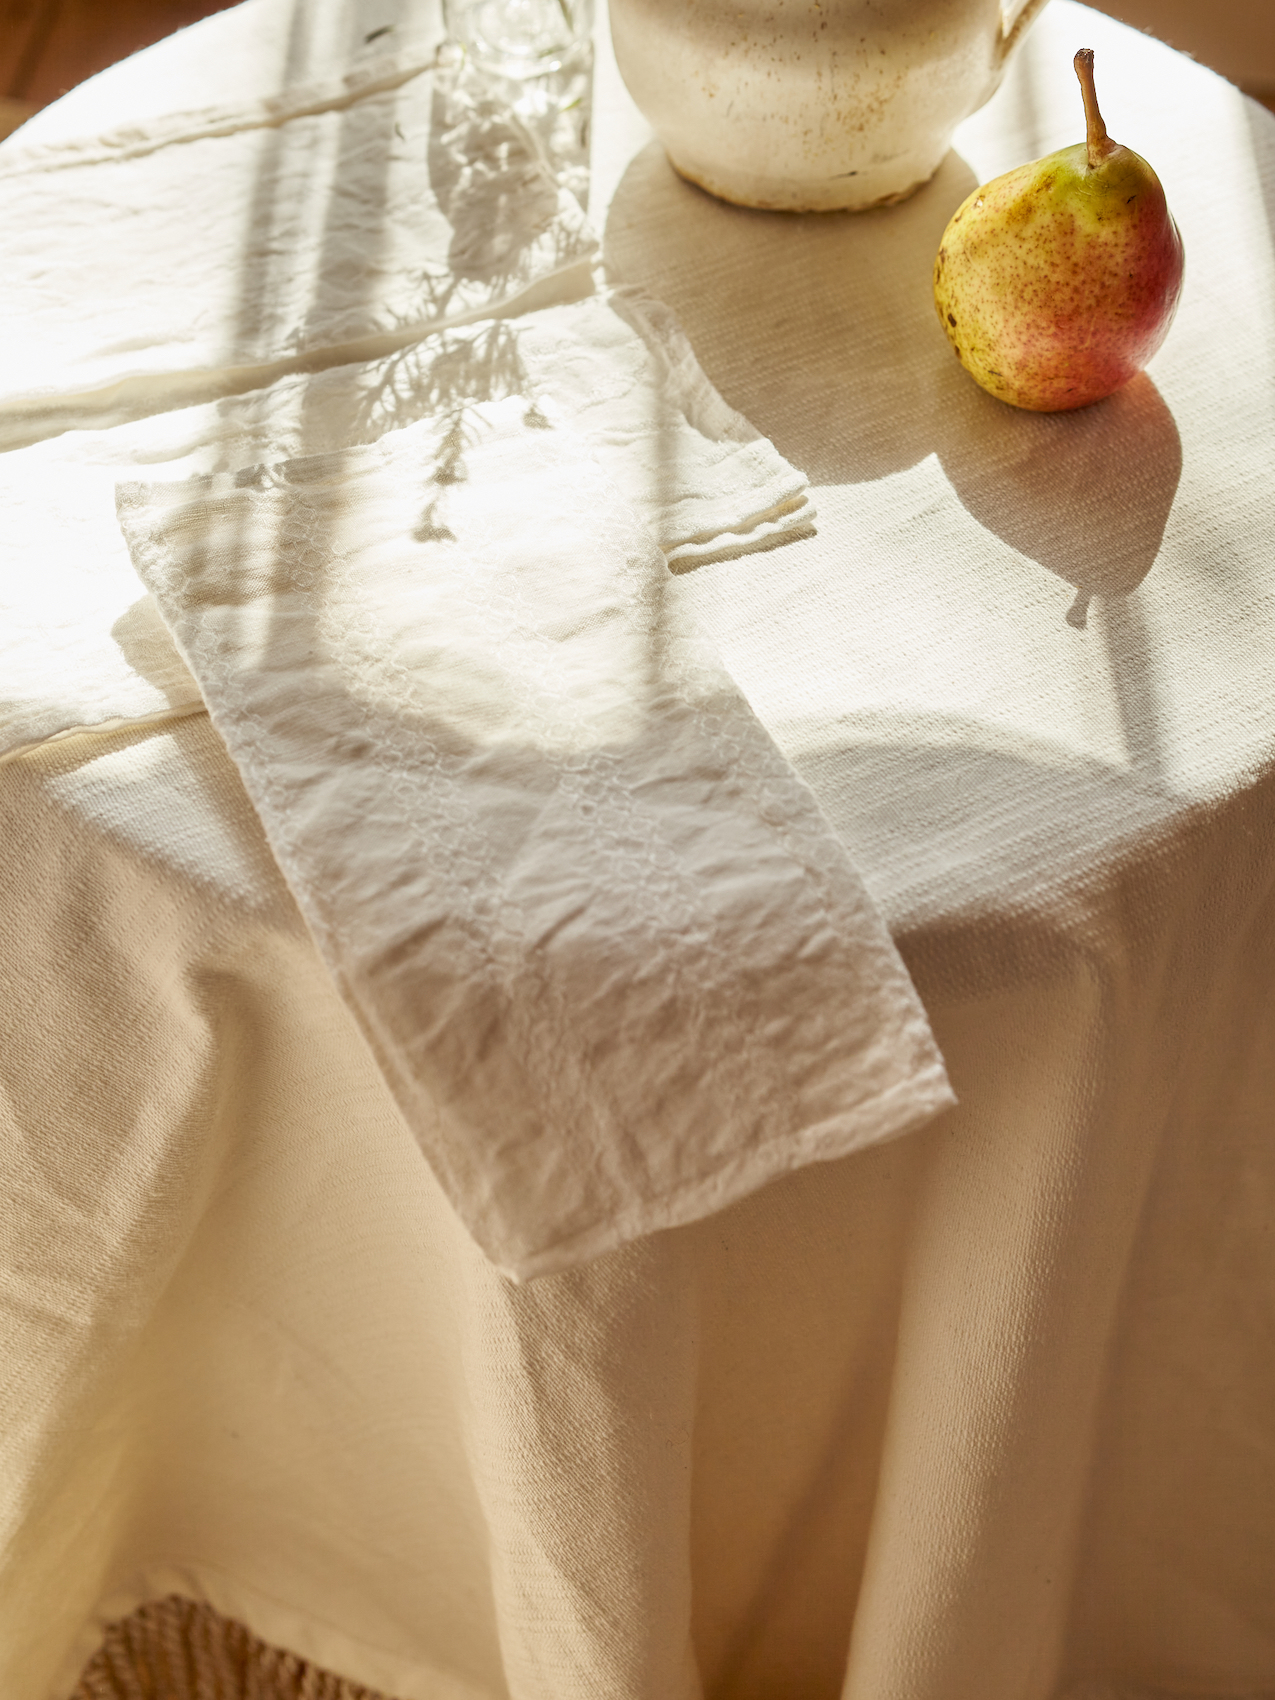 Linen napkin by East London Cloth in Effect Magazine